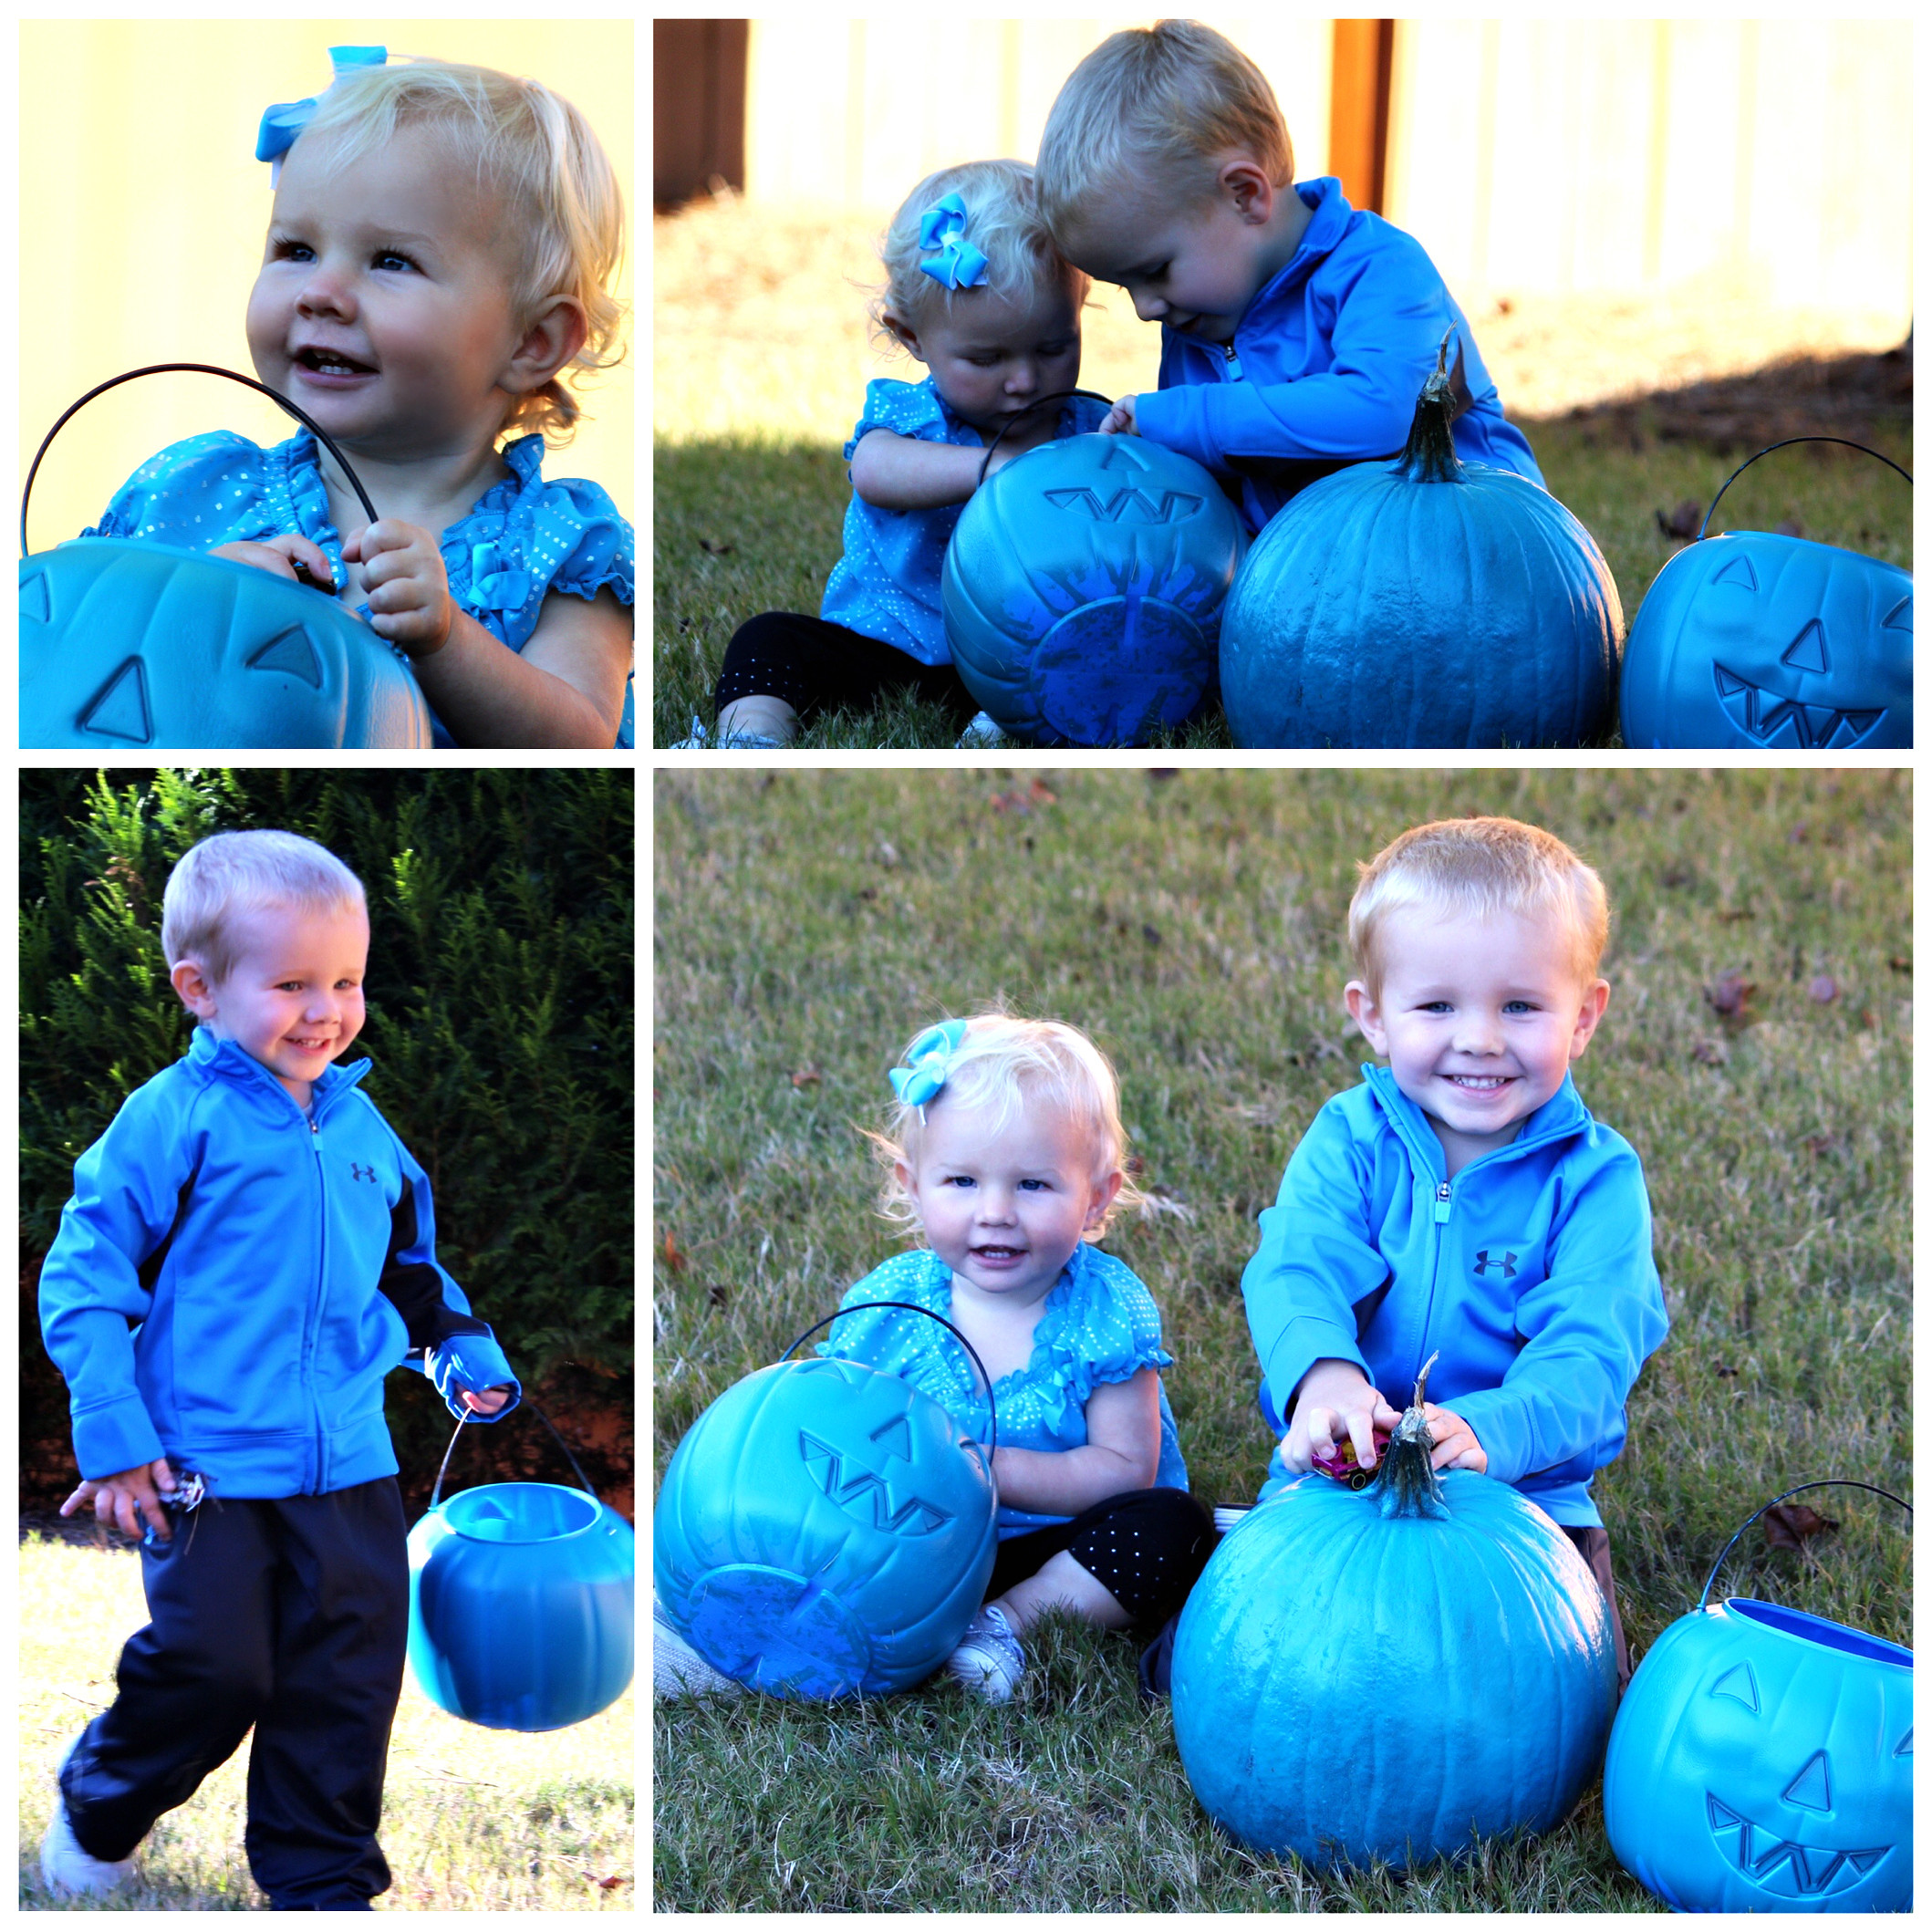 Jake, 3, and Abby, 2, with teal pumpkins